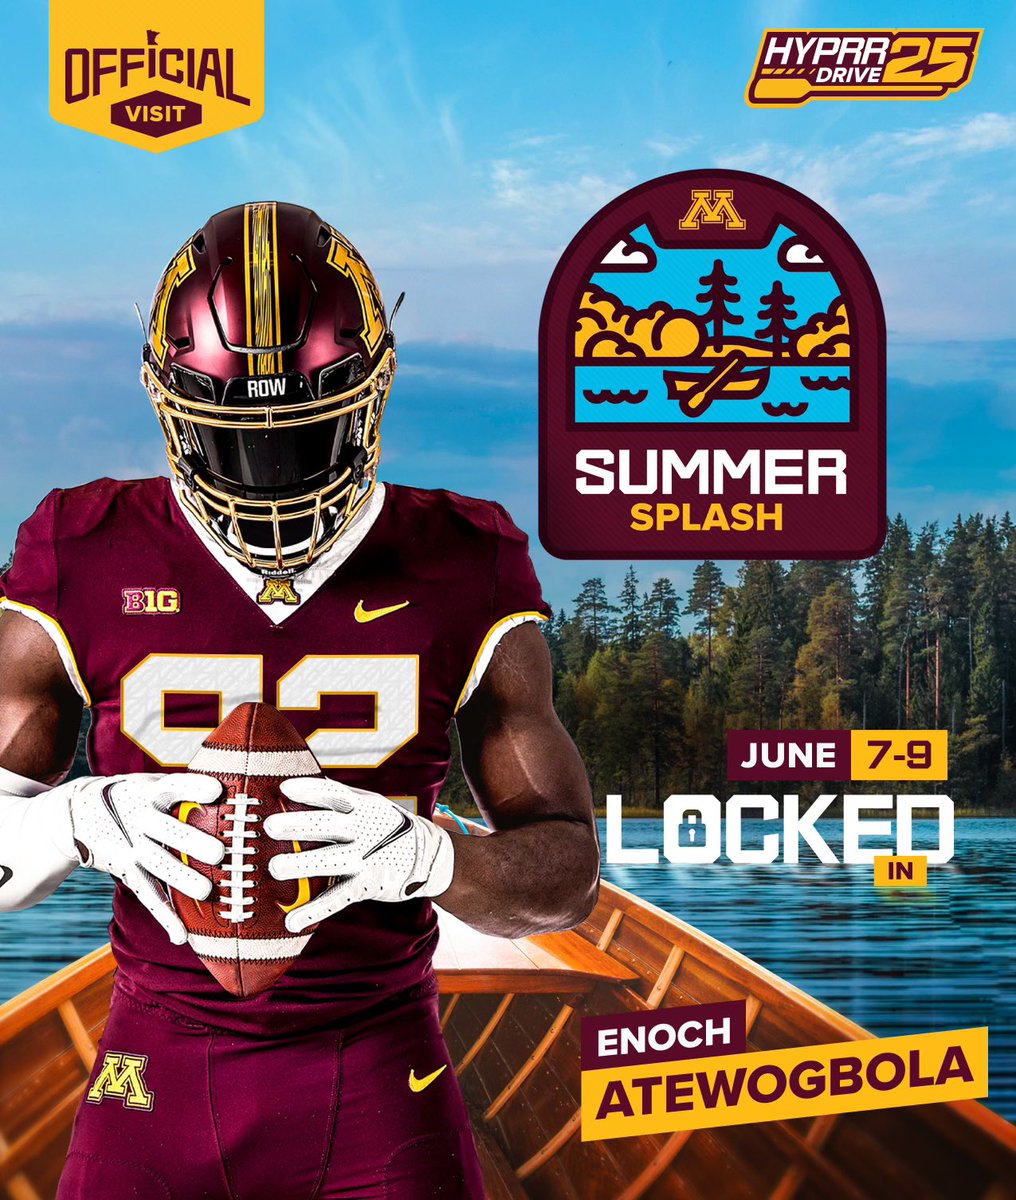 I will be taking my Official Visit on June 7-9 to The University of Minnesota. Can’t wait to get on campus!!! #RowTheBoat 🚣‍♂️ @COACHDOTT @Coach_DeBo46 @AvonFBOrioles @RobGibsonHC @RyanJBallou @CoachThompson13 @CoachCam_CamQBs @bringthehammer @raycp315 @CoachDSchauss